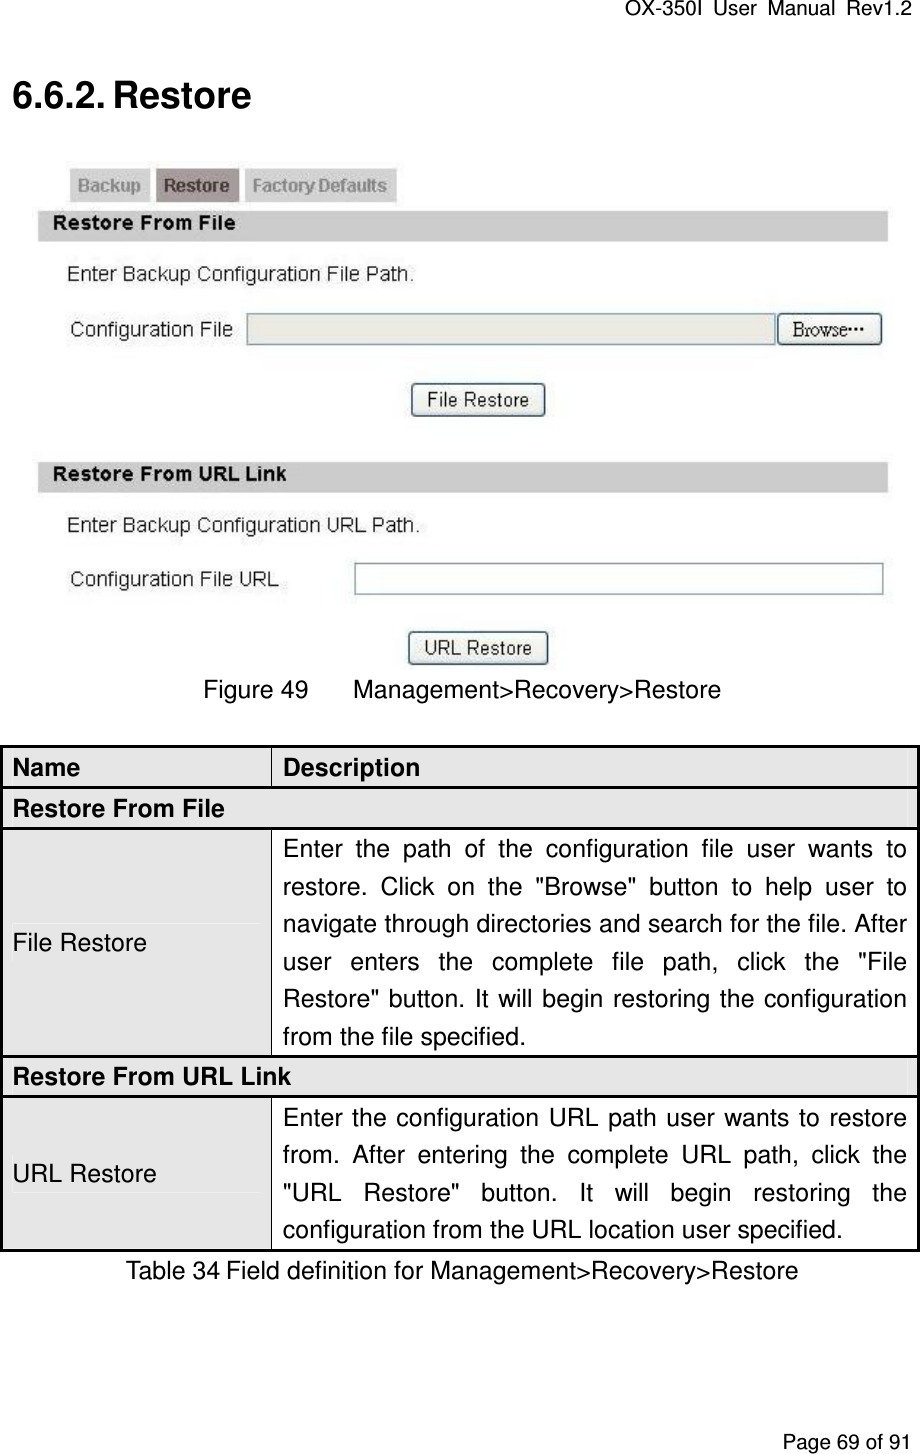 OX-350I  User  Manual  Rev1.2 Page 69 of 91 6.6.2. Restore    Figure 49  Management&gt;Recovery&gt;Restore Name  Description Restore From File File Restore Enter  the  path  of  the  configuration  file  user  wants  to restore.  Click  on  the  &quot;Browse&quot;  button  to  help  user  to navigate through directories and search for the file. After user  enters  the  complete  file  path,  click  the  &quot;File Restore&quot; button. It will begin restoring the configuration from the file specified.   Restore From URL Link URL Restore Enter the configuration URL path user wants to restore from.  After  entering  the  complete  URL  path,  click  the &quot;URL  Restore&quot;  button.  It  will  begin  restoring  the configuration from the URL location user specified. Table 34 Field definition for Management&gt;Recovery&gt;Restore 